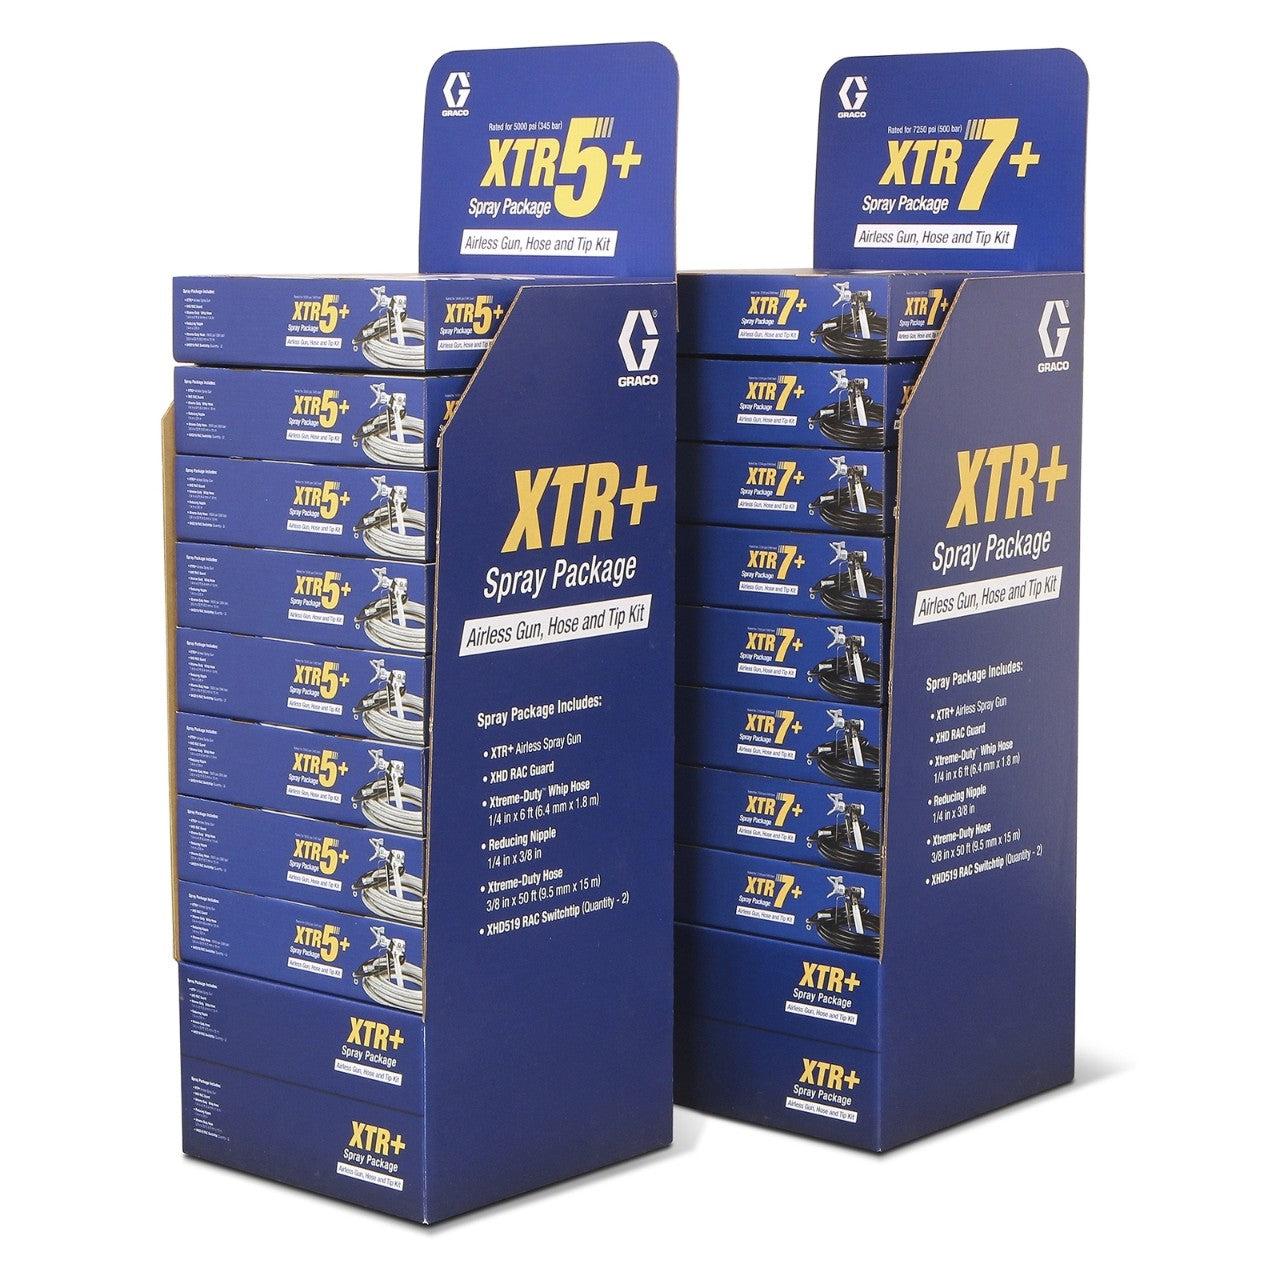 XTR5+ Gun, Hose and Tip Kit, 8-pack of 26C962 with Display Stand